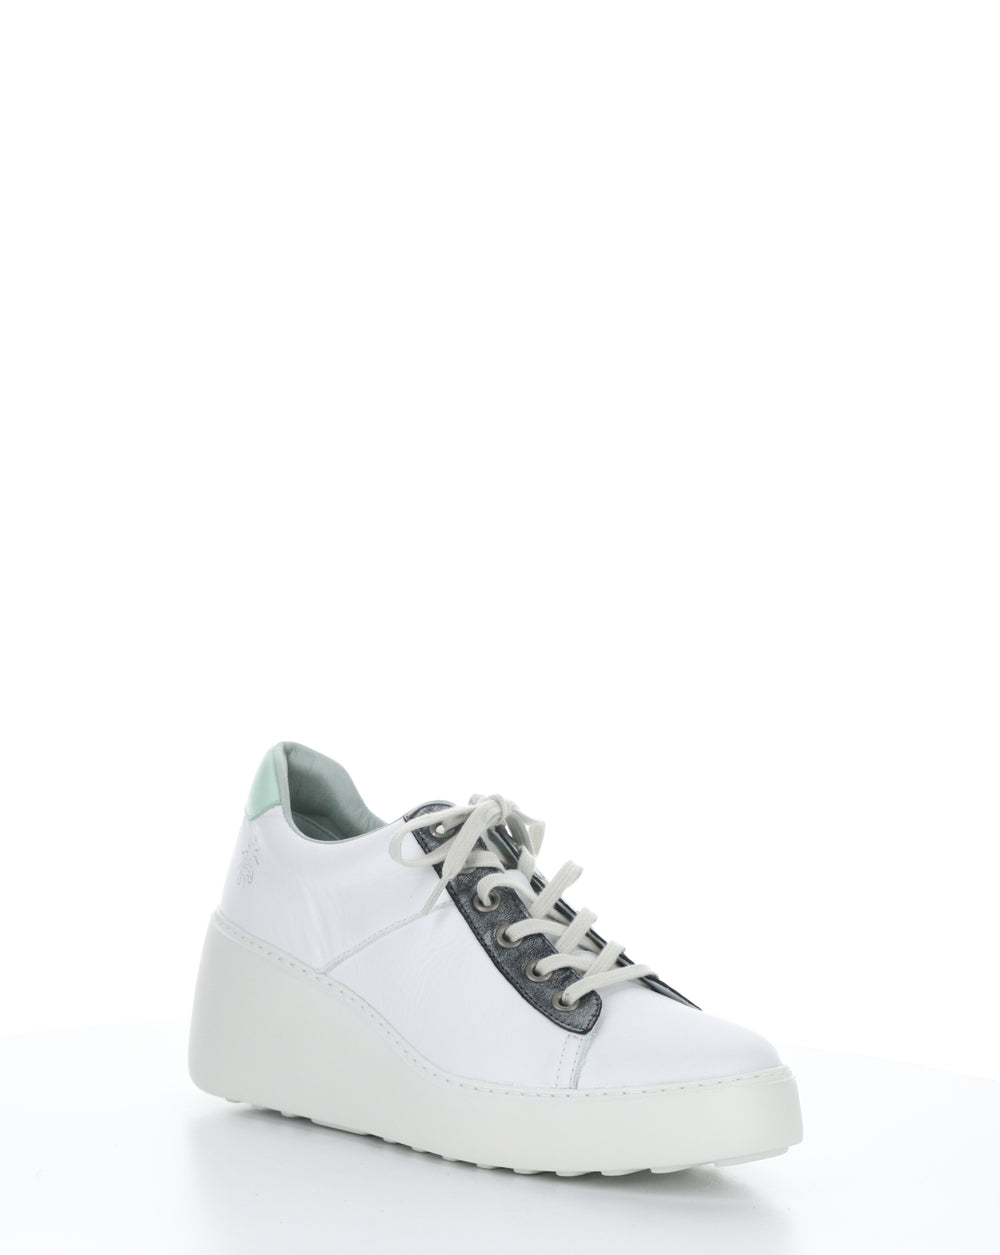 DELF580FLY 001 WHITE/GRAPH/MYNT Lace-up Shoes